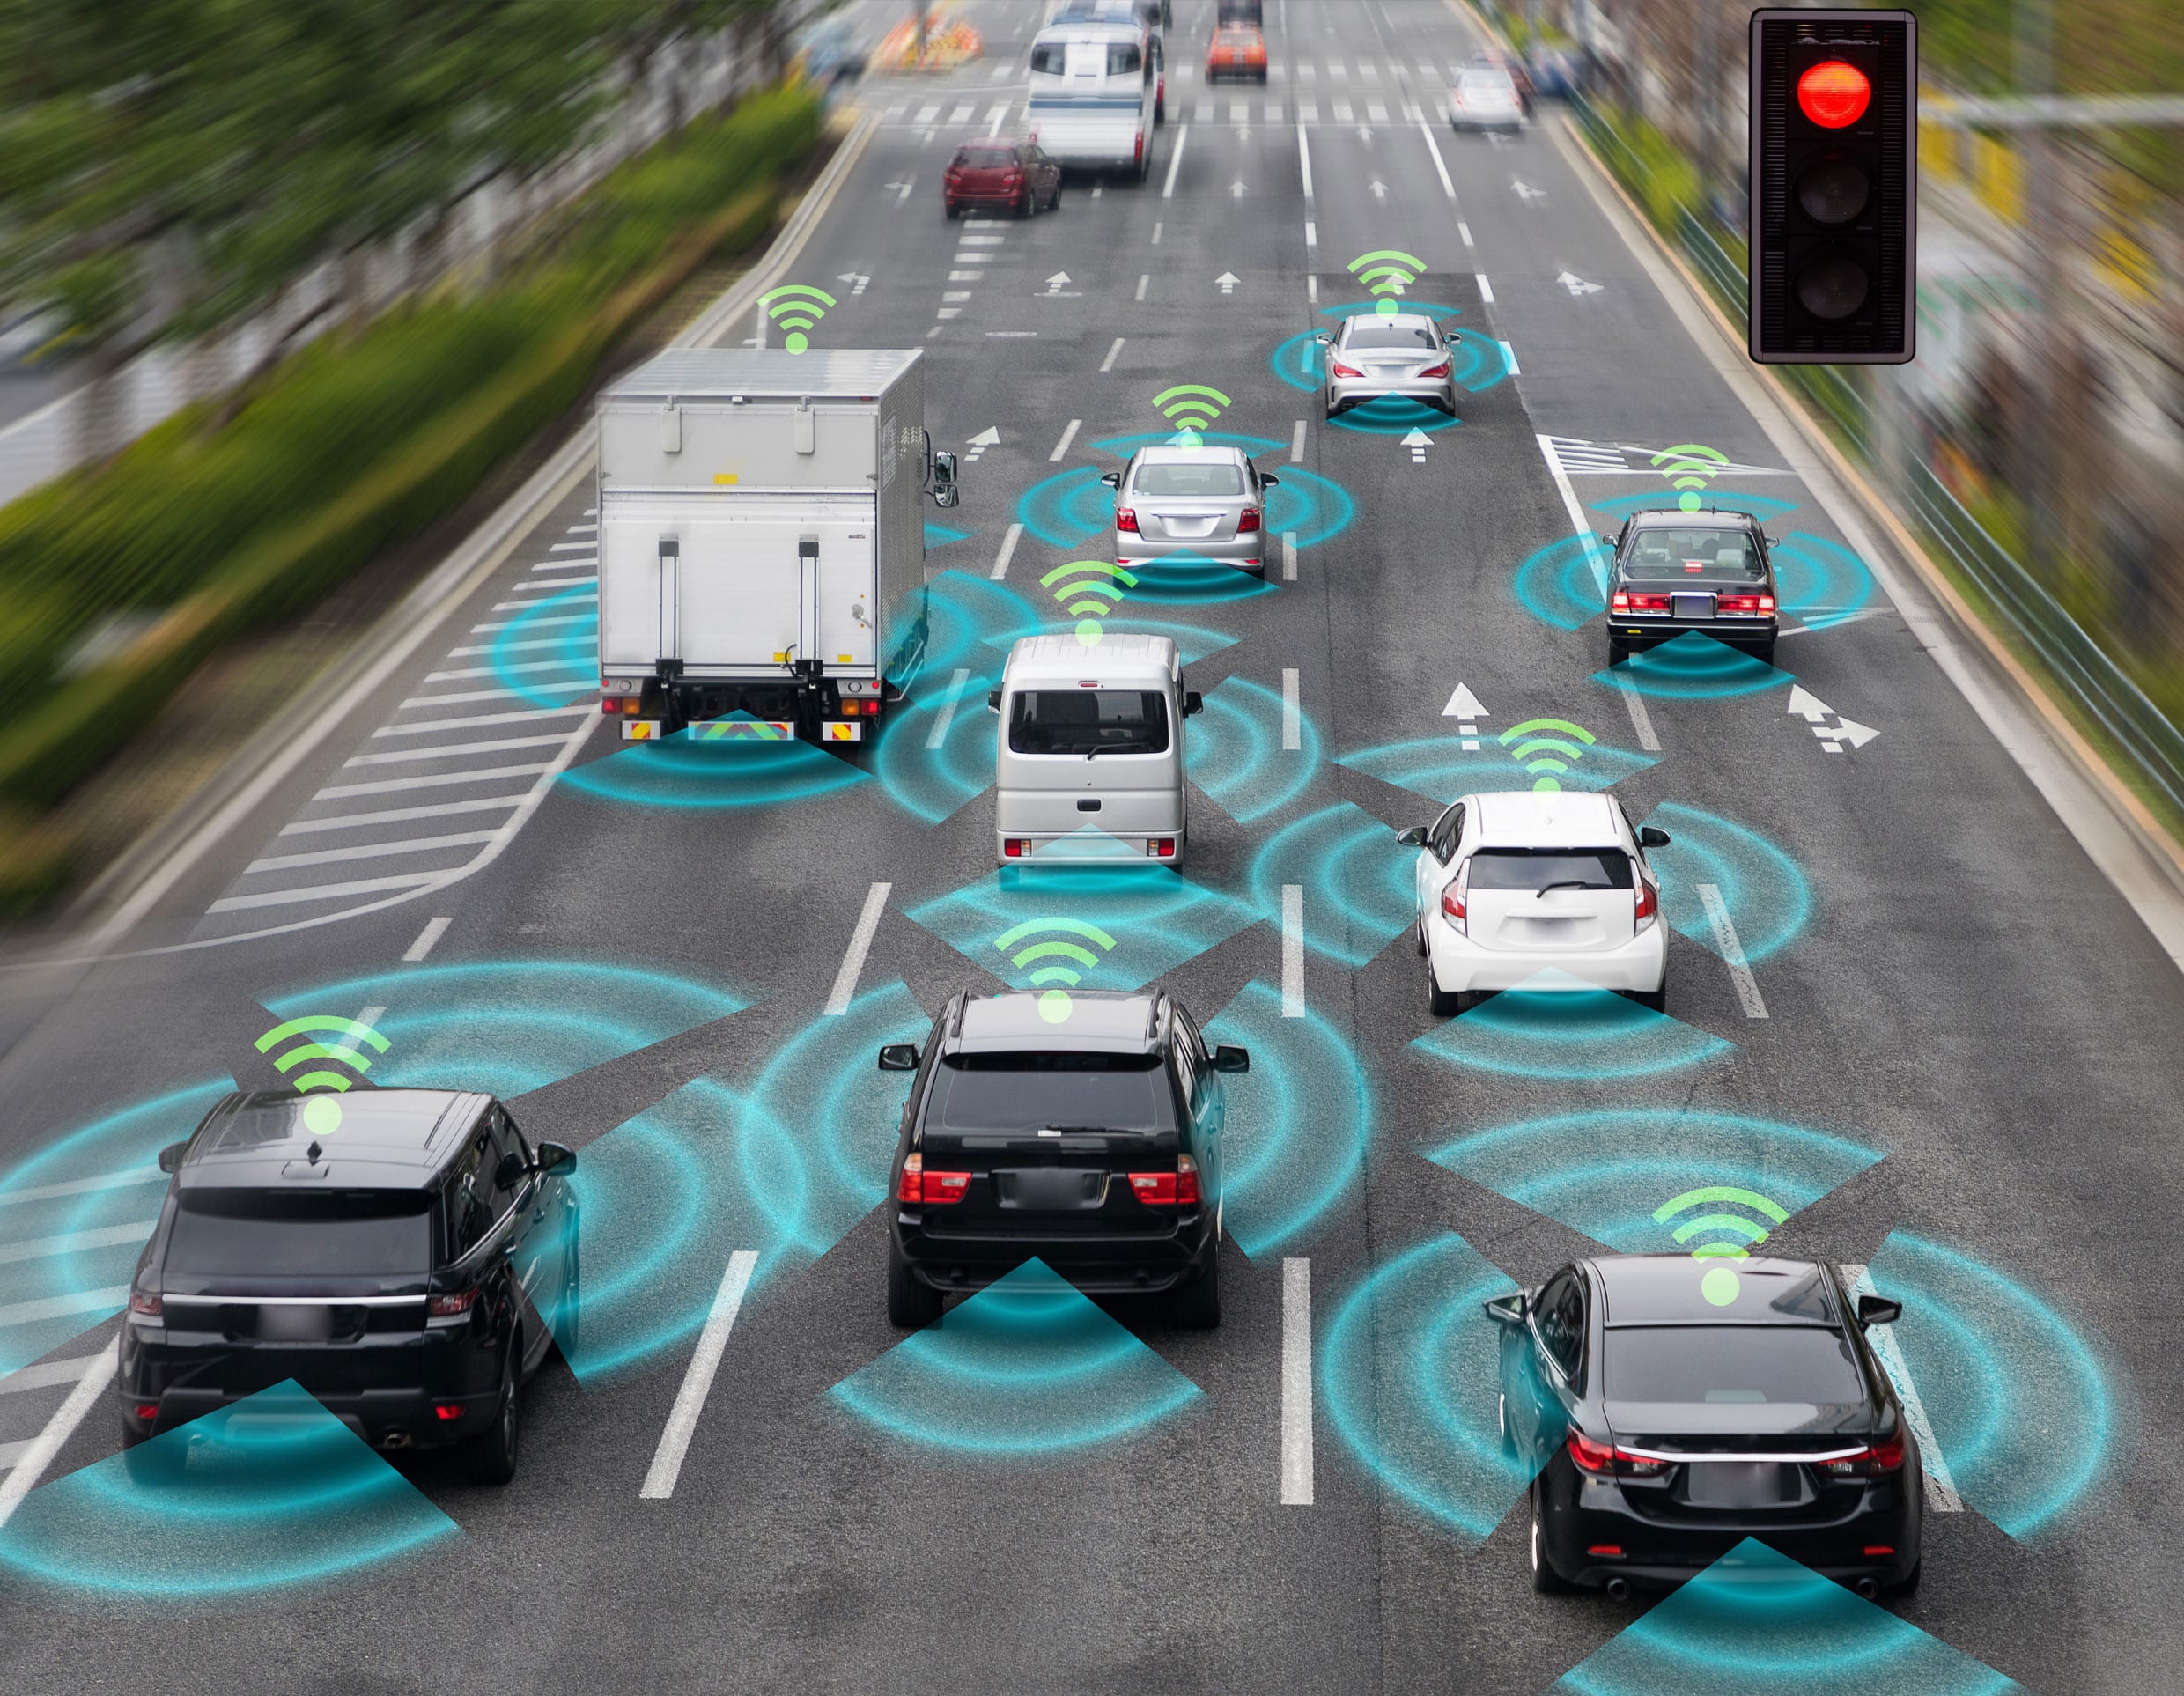 Test Automation for a Connected Traffic Controller Device